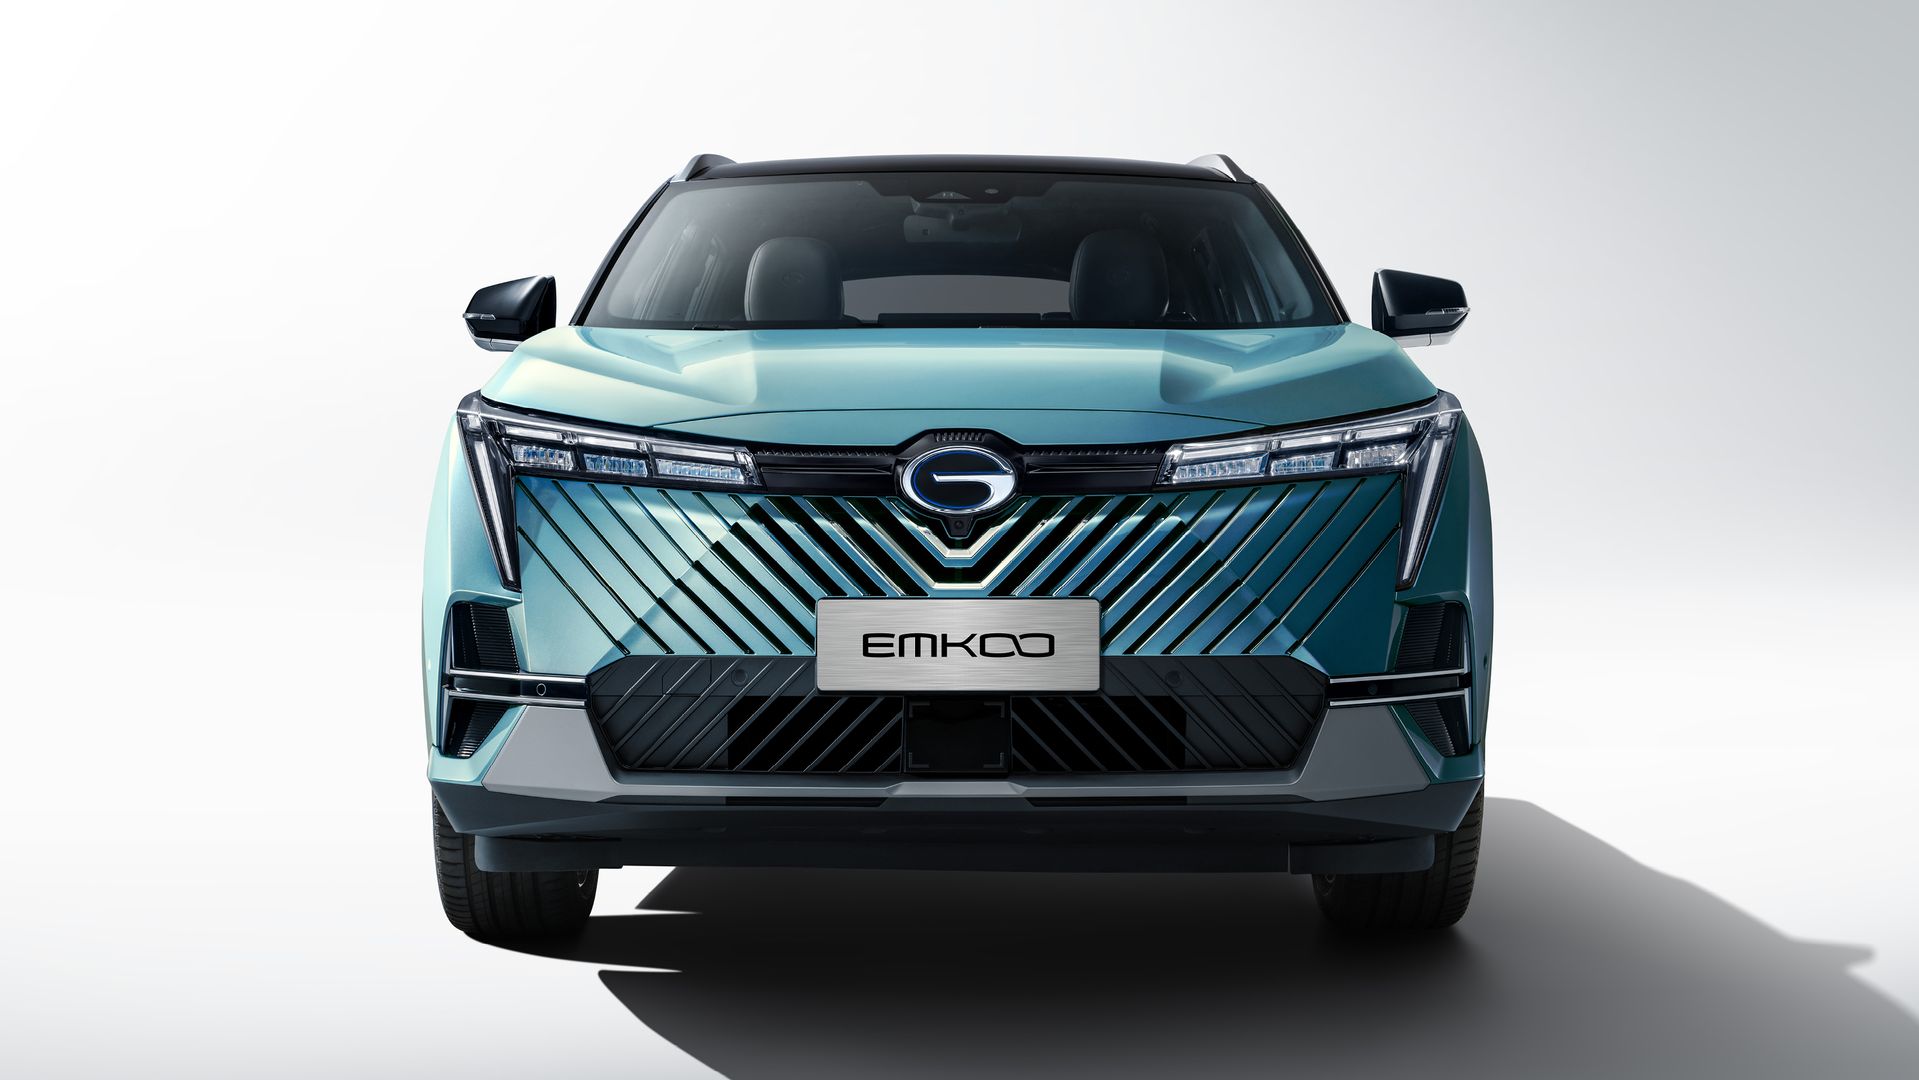 Front Grille with rhythmic lighting effect